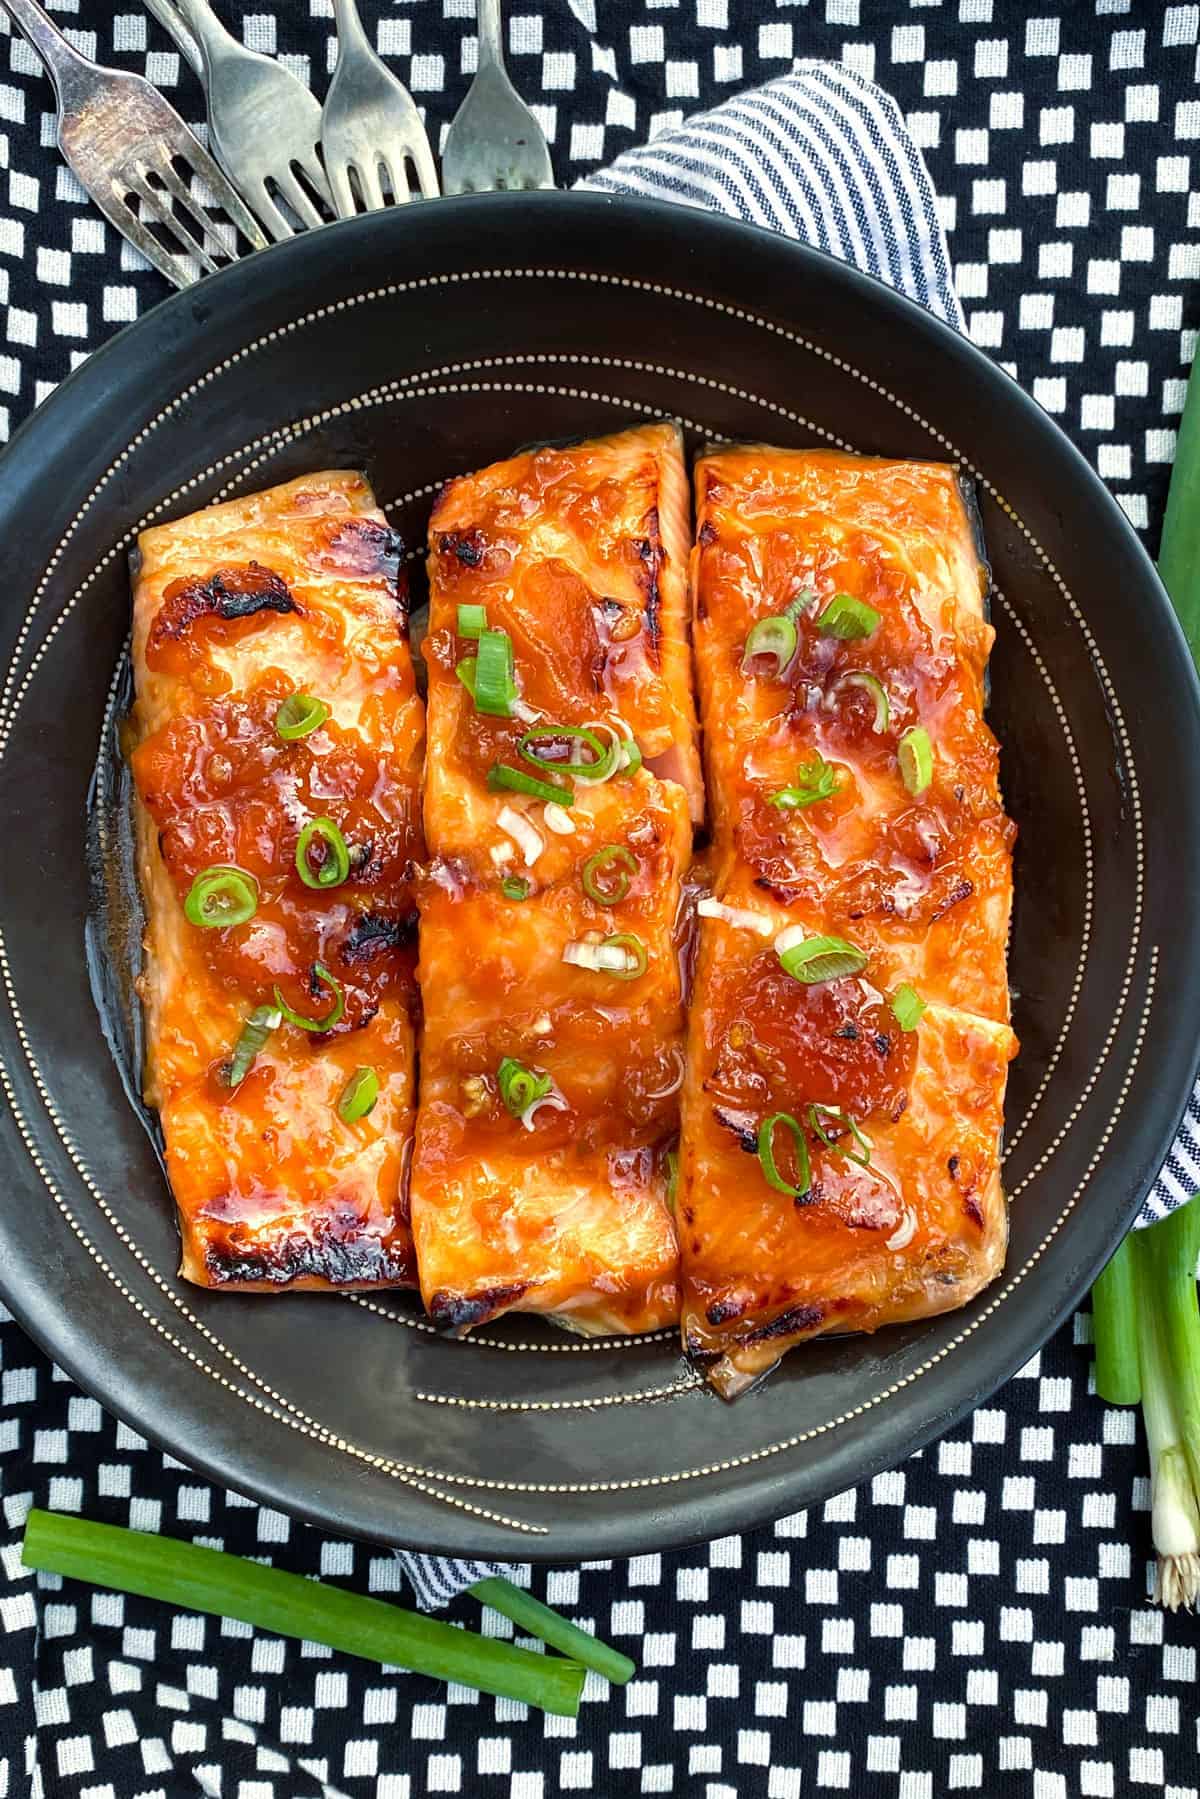 3 rectangular broiled salmon fillets with apricot glaze and a topping of chopped scallions, on a black plate.